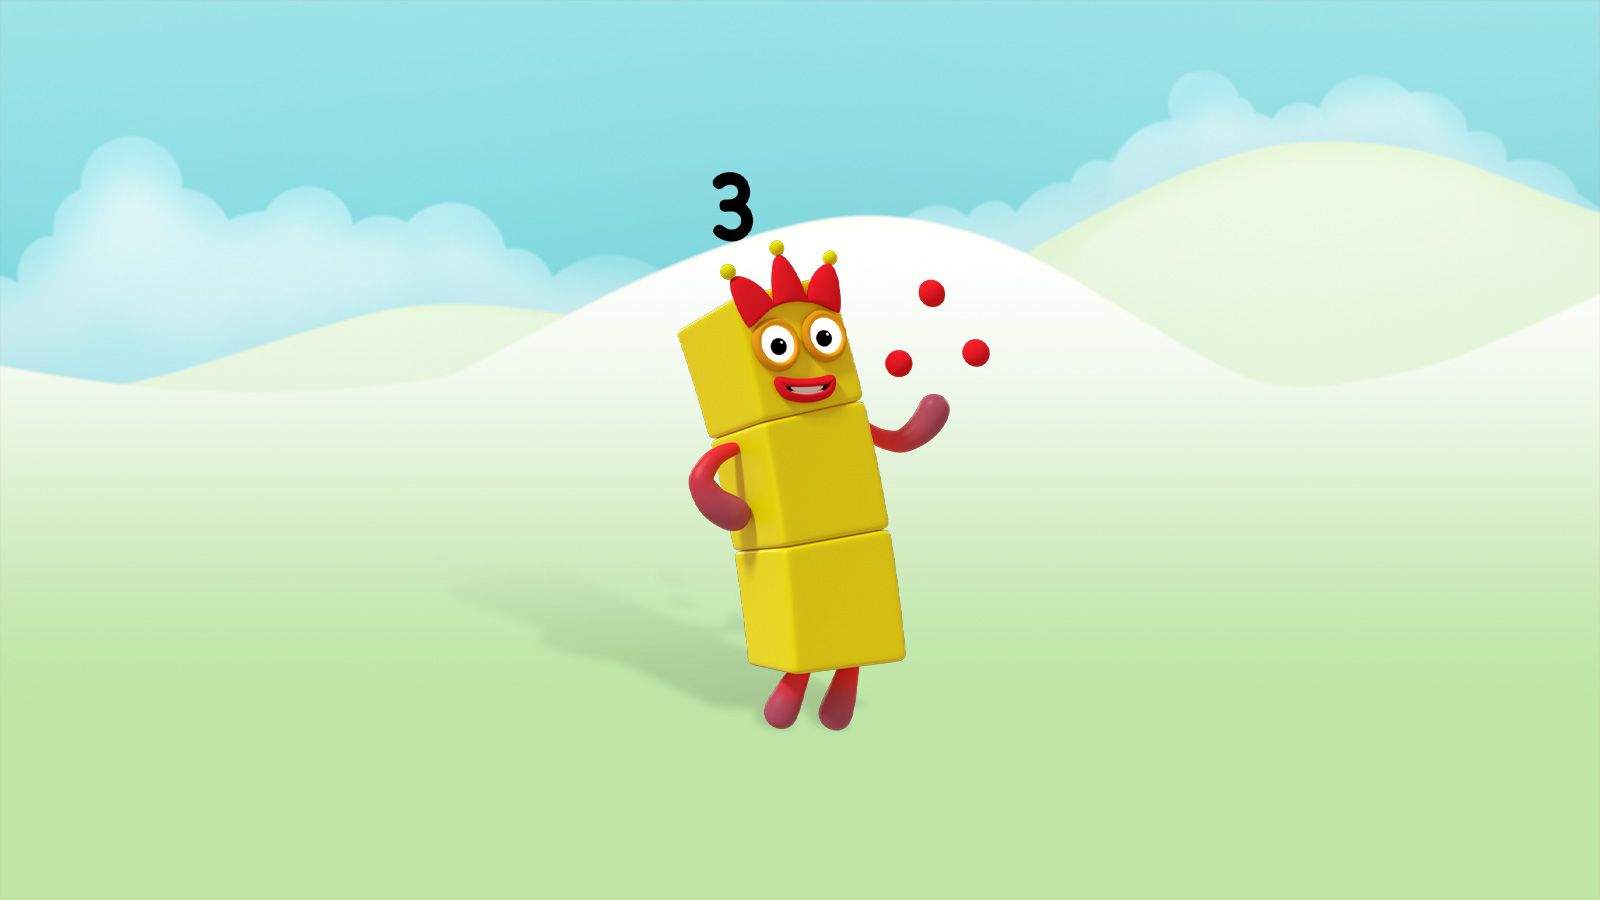 Numberblocks. Learning is fun with Learning Blocks